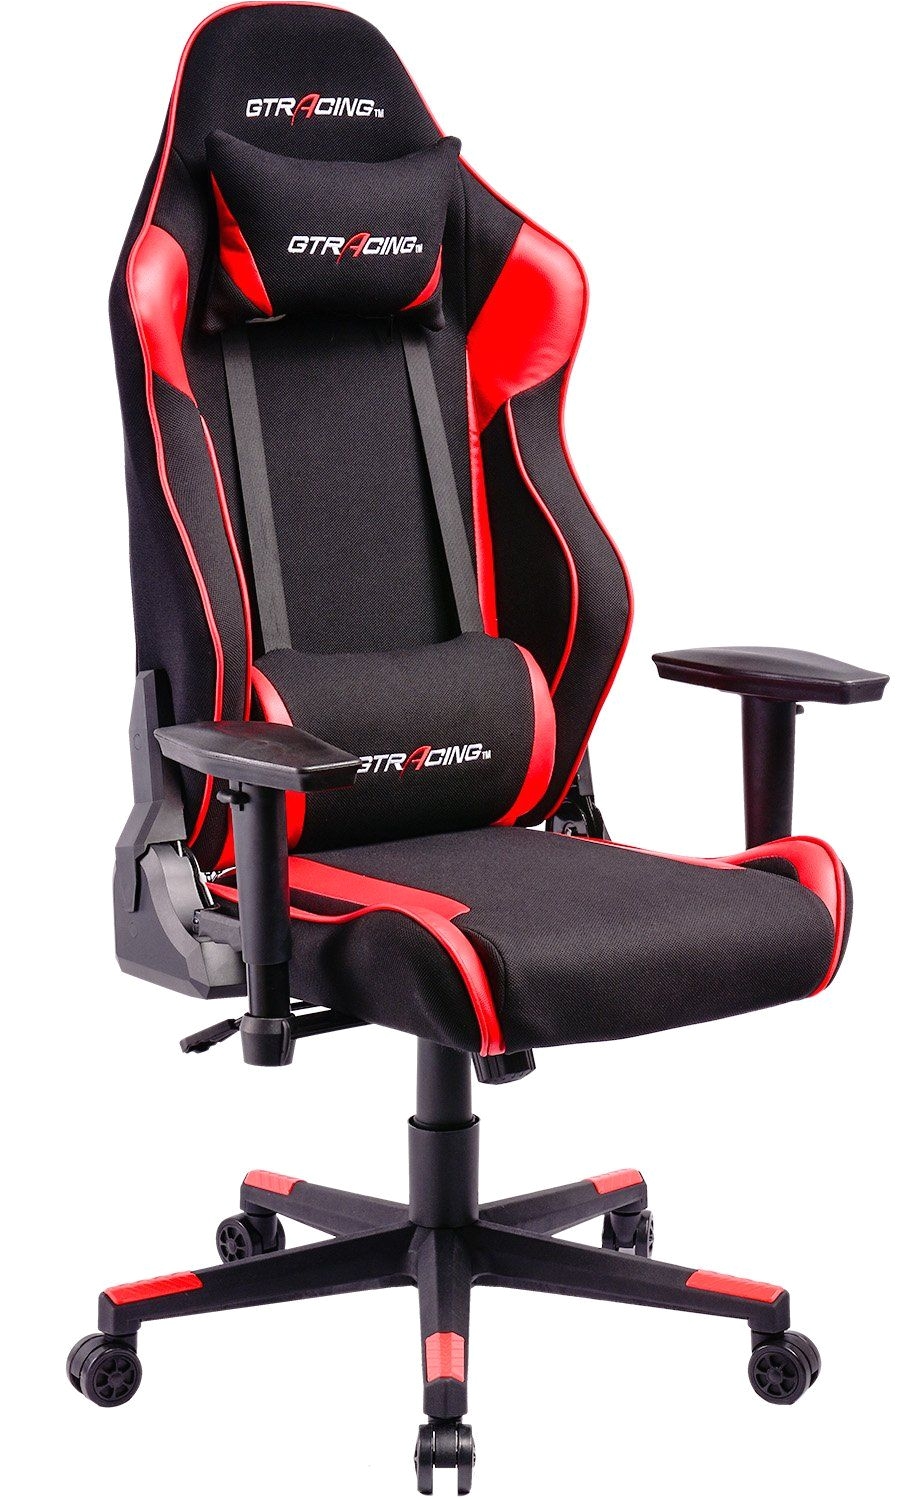 Racing Office Chair Cheap Gtracing High Back Gaming Chair Fabric and Pu Leather Racing Chair